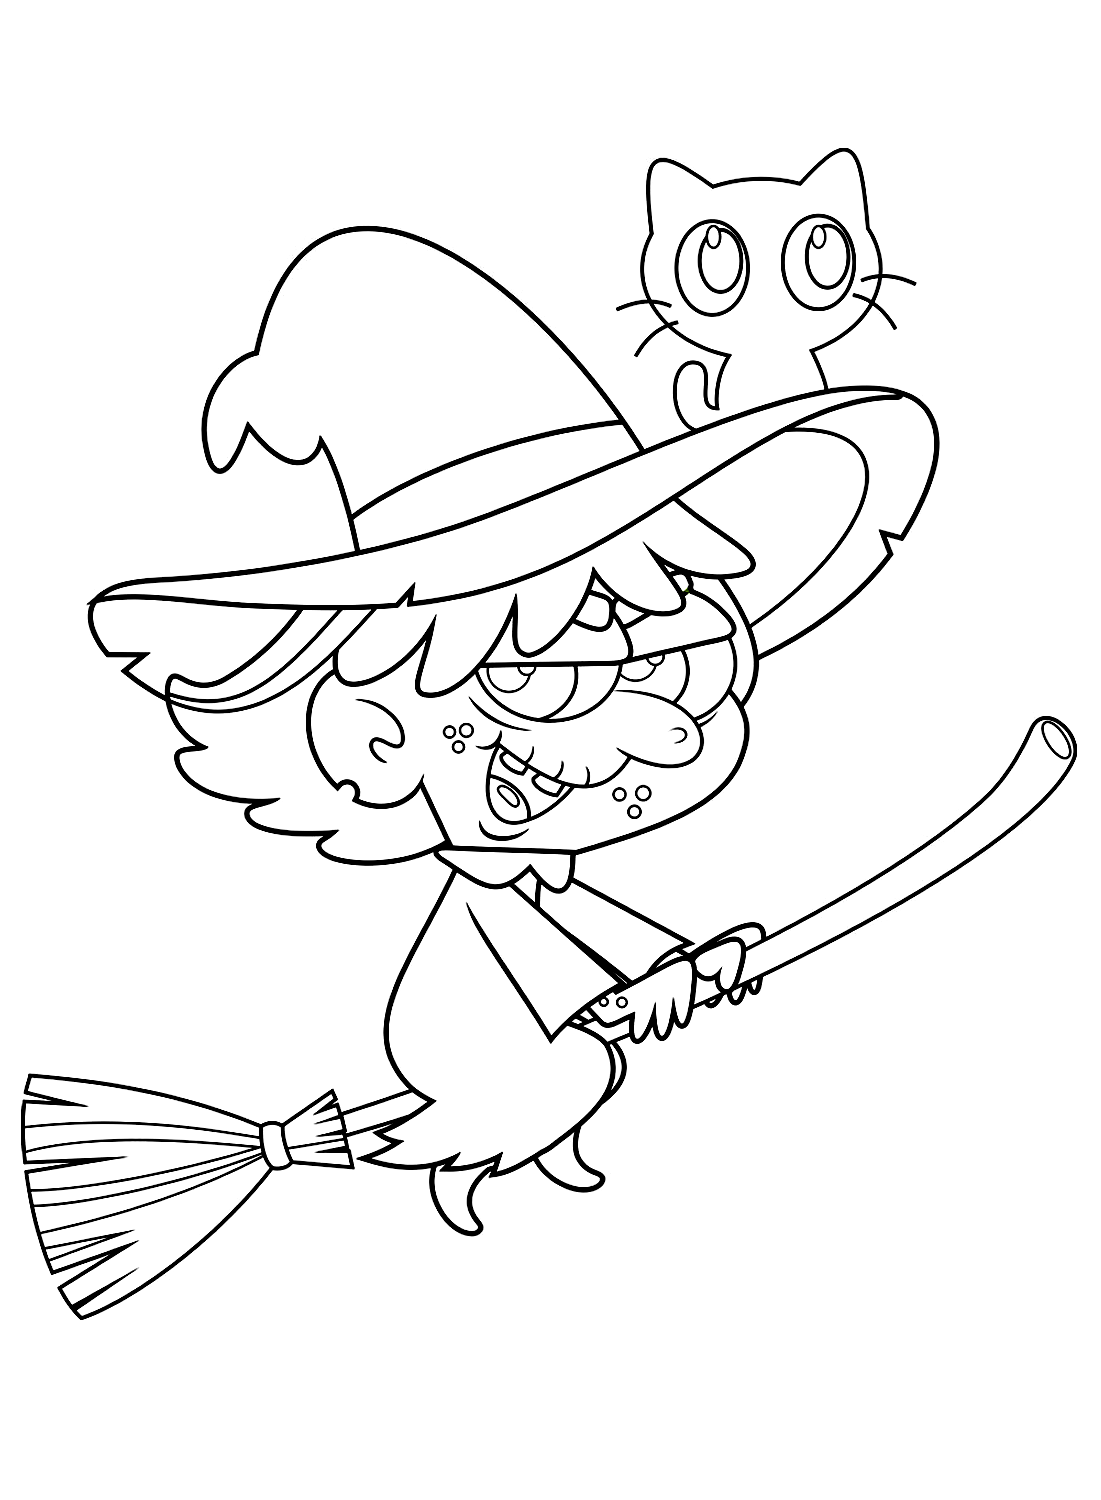 Coloring Page of Witch and cat